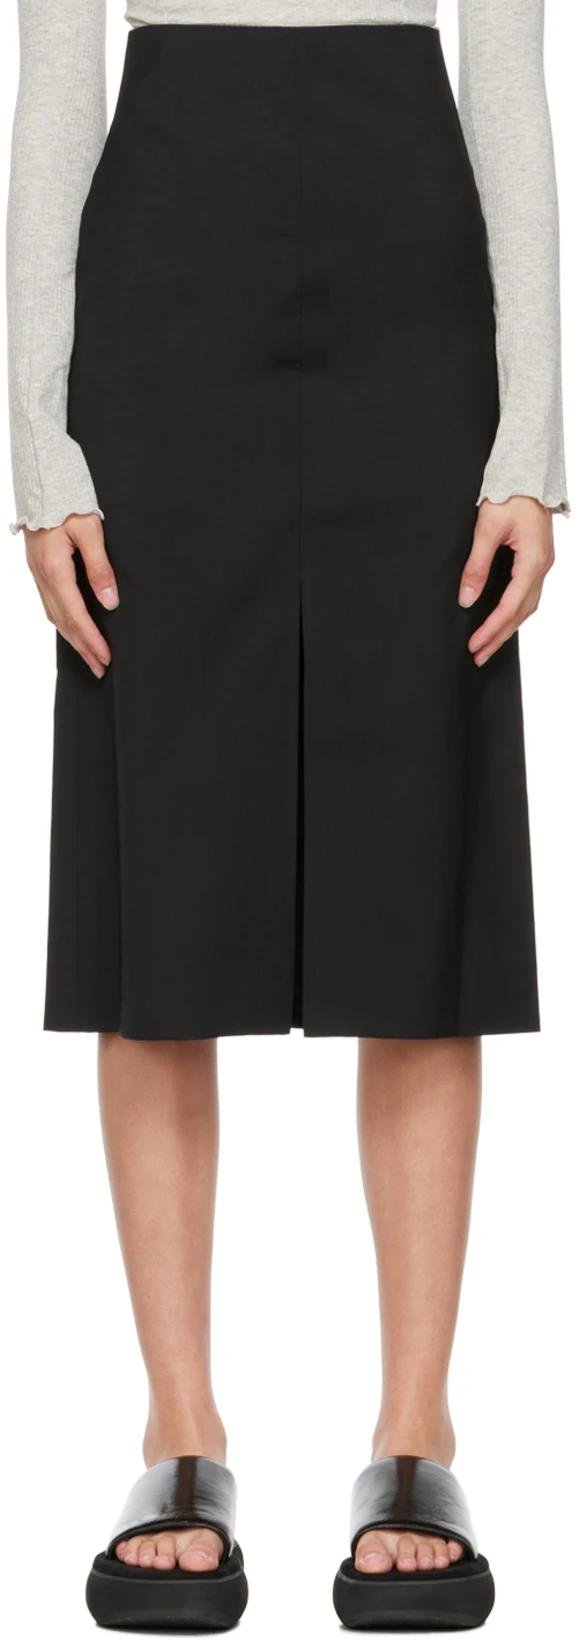 Black Tailored Midi Skirt by CO